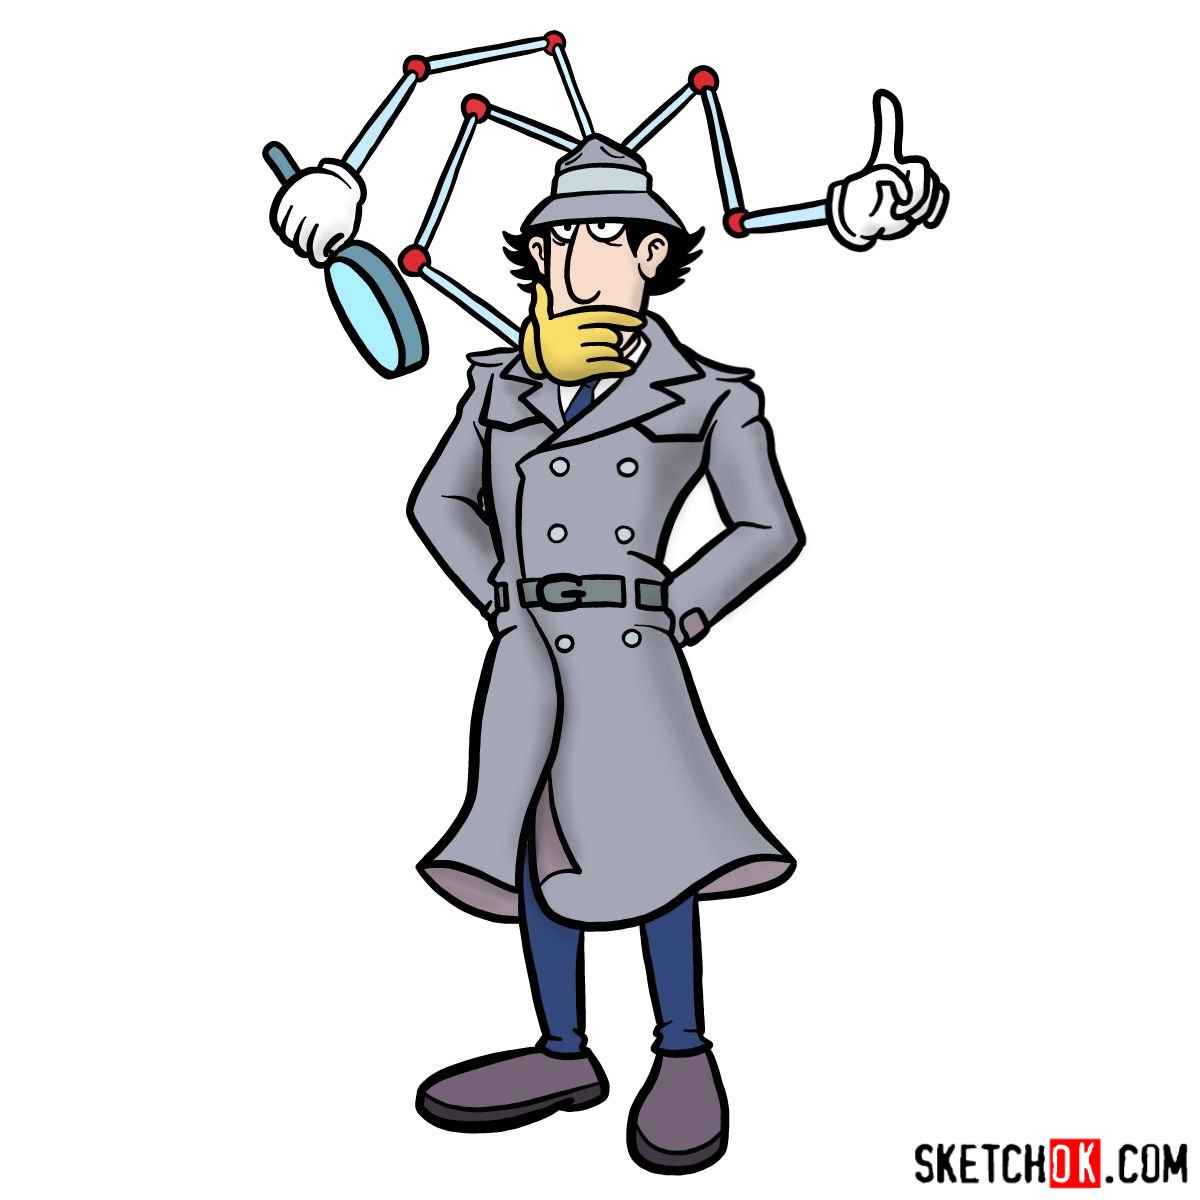 How to draw Inspector Gadget